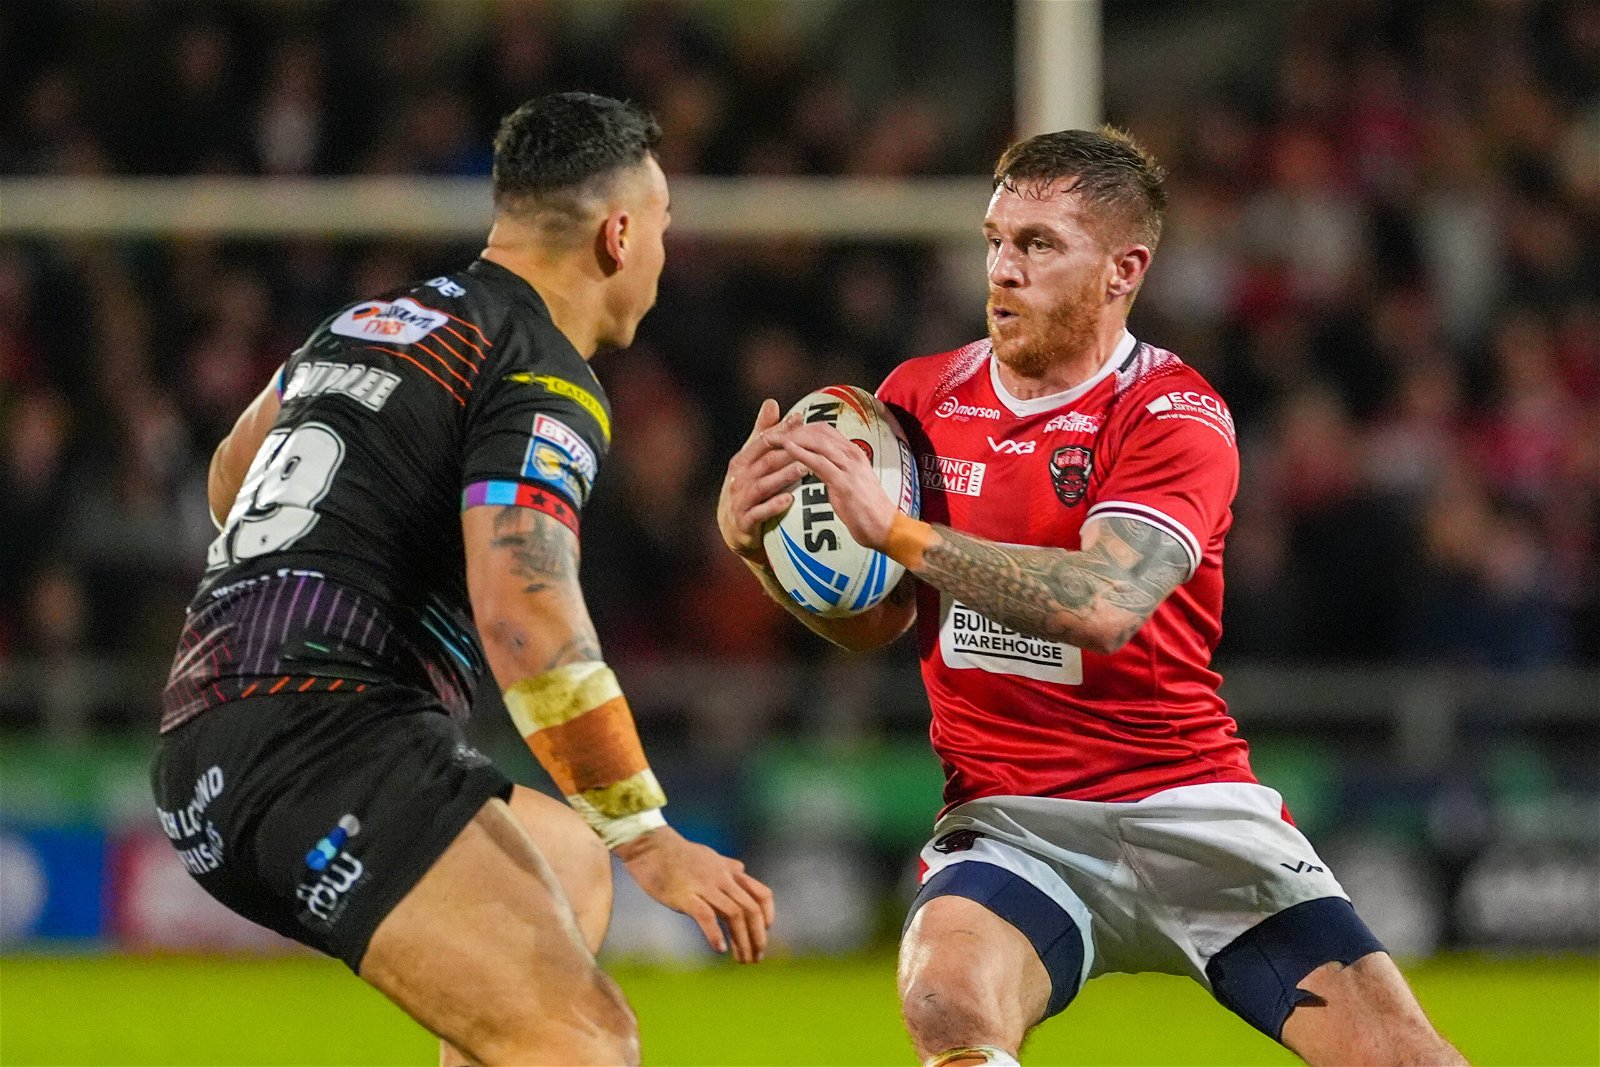 Marc Sneyd, playing for Salford, runs with ball in hand, looking to evade a defender. He leads the Man of Steel standings.